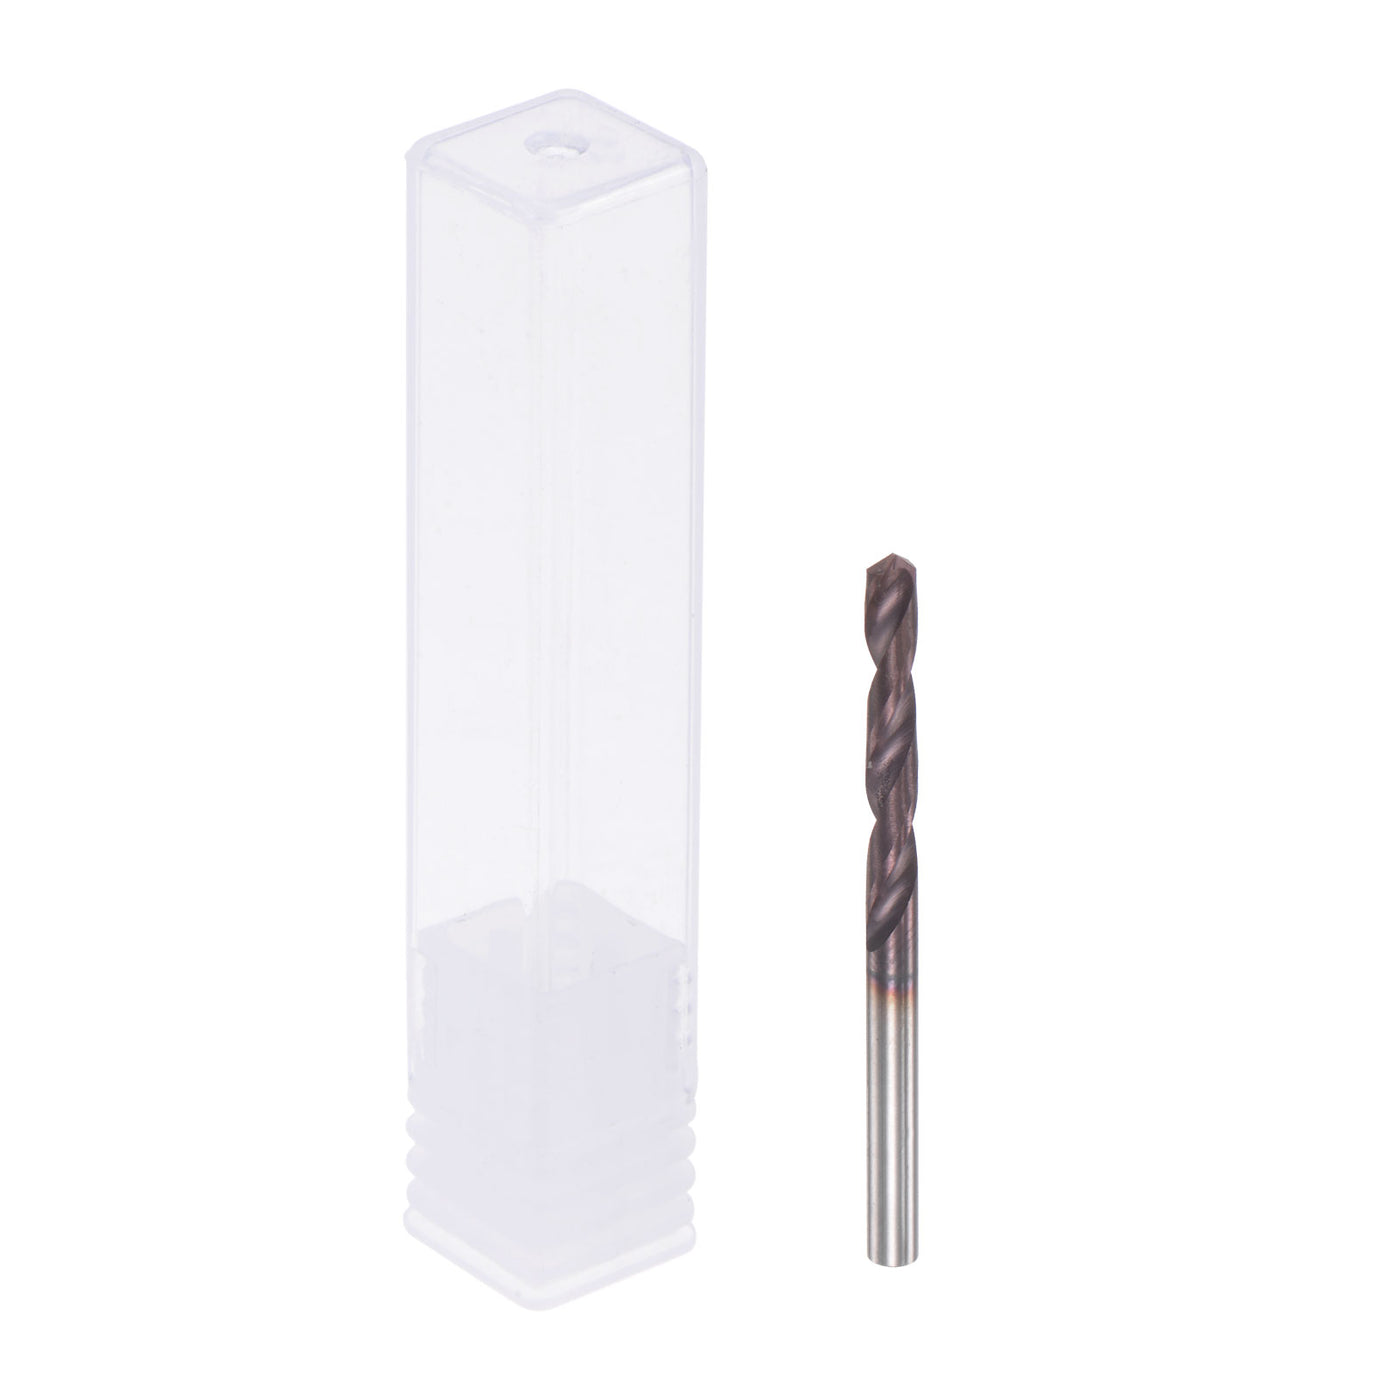 uxcell Uxcell 2.7mm DIN K45 Tungsten Carbide AlTiSin Coated Drill Bit for Stainless Steel